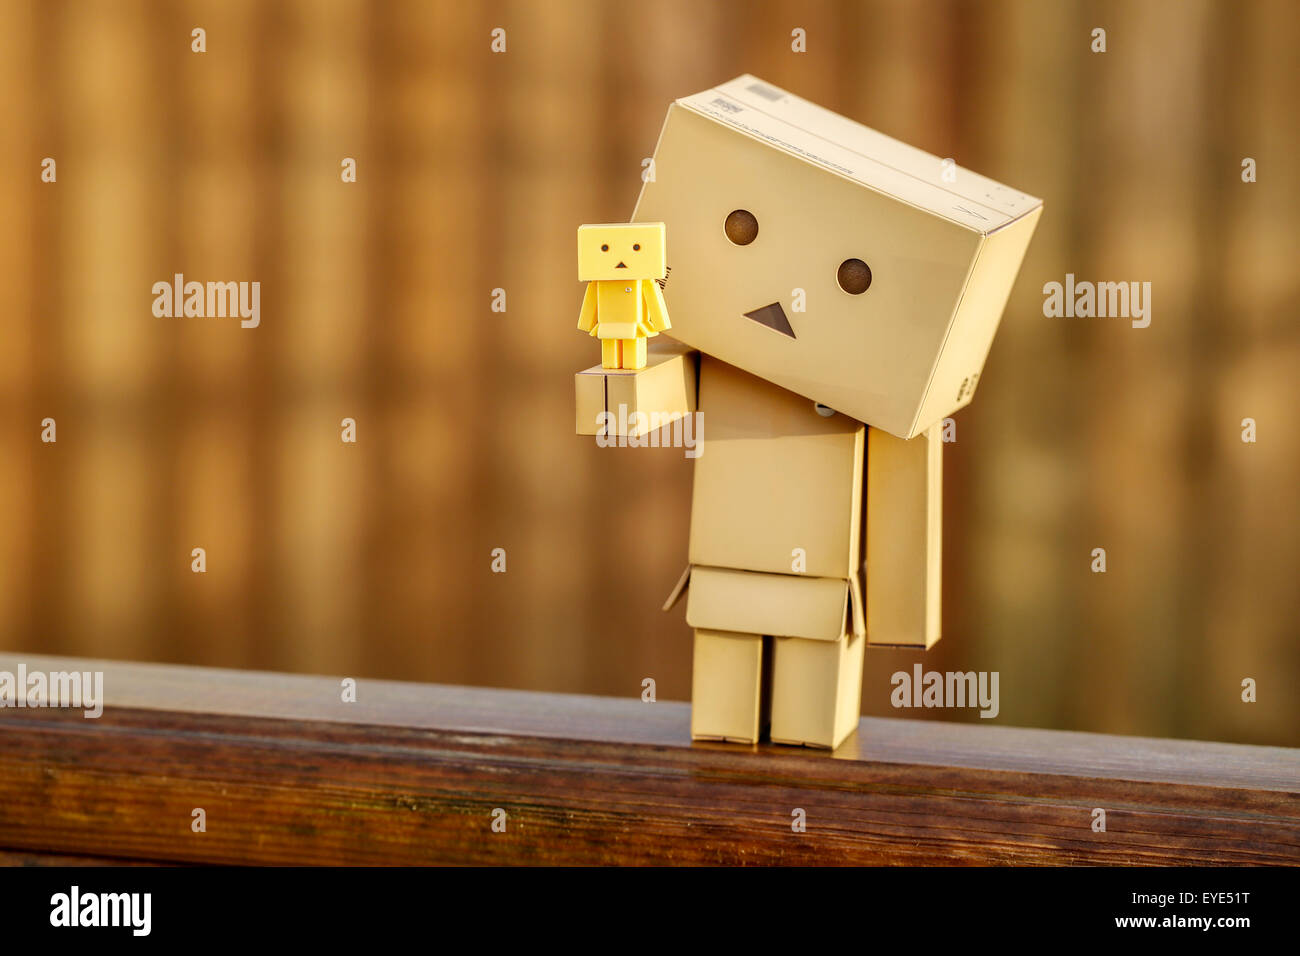 A Manga Japanese toy Danbo Danboard robot character posed for a portrait picture on a warm sunny morning. A large Danbo holding a tiny Danbo Stock Photo